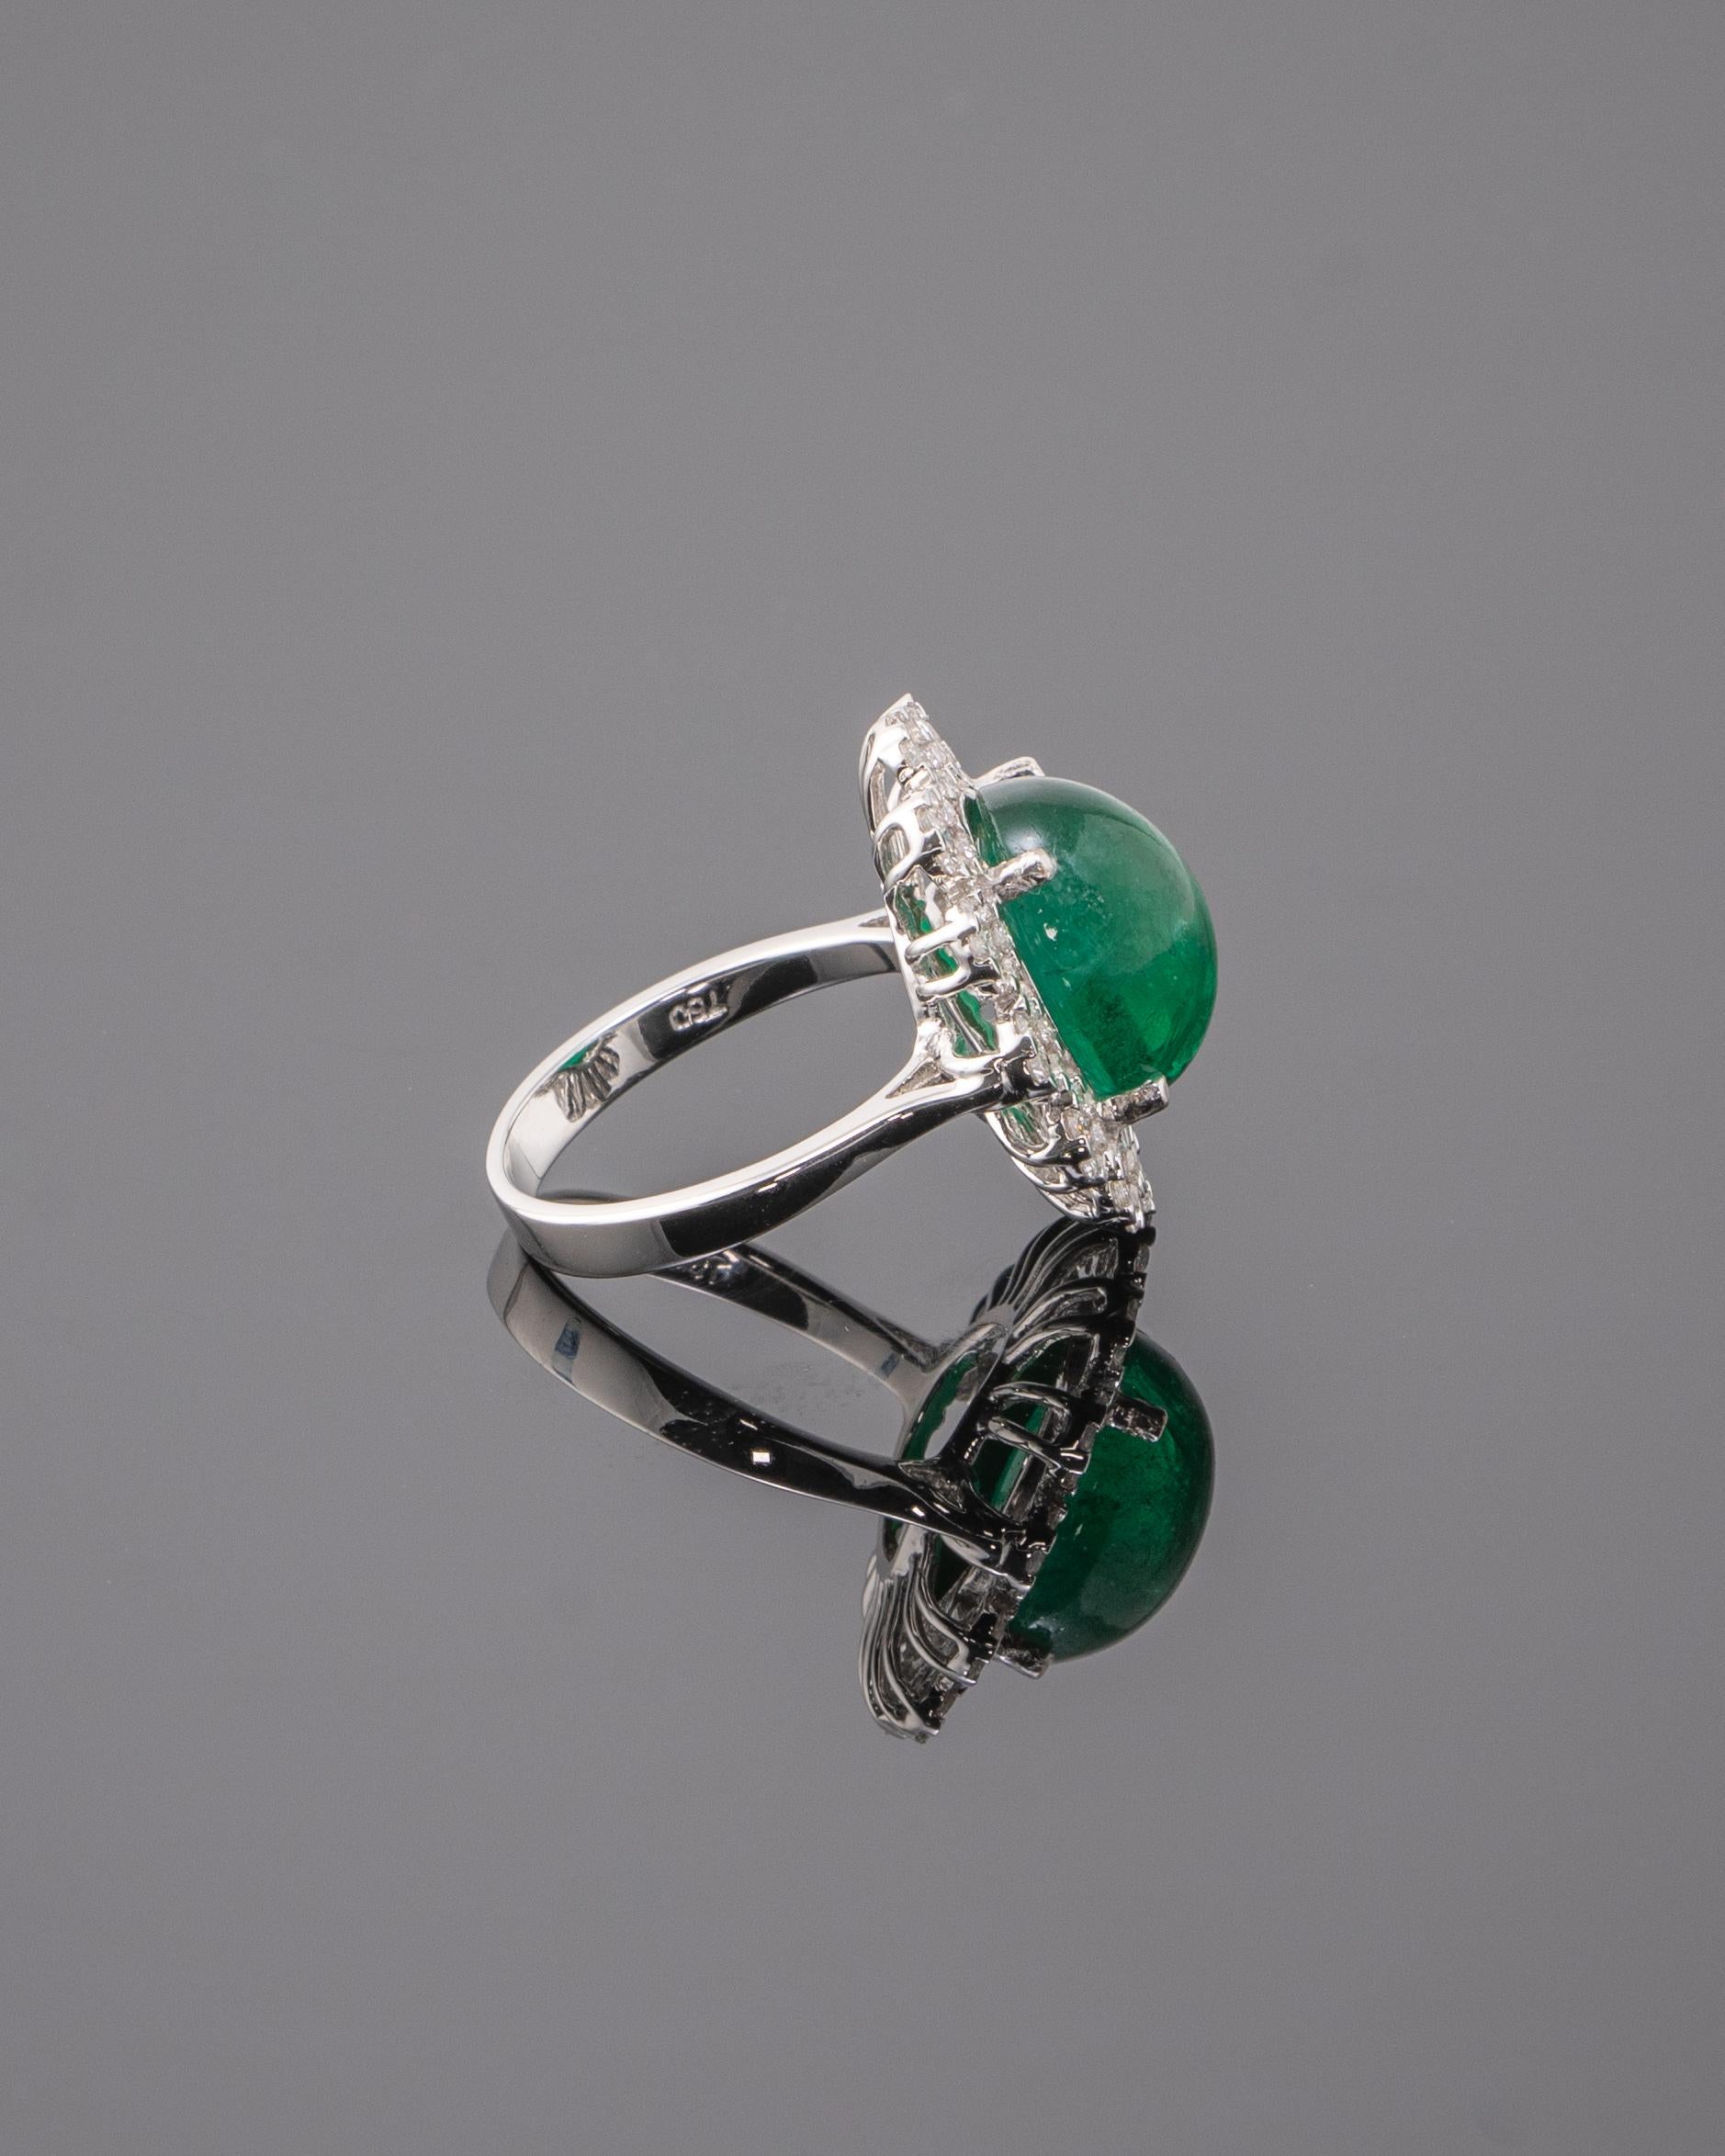 A stunning Zambian Emerald cabochon and Diamond ring, set in solid 18K White Gold. Size US 6, but can be changed.
Please feel free to message us if you have any queries. 
Free shipping provided. Returns accepted. 

Stone Details: 
Stone: Zambian